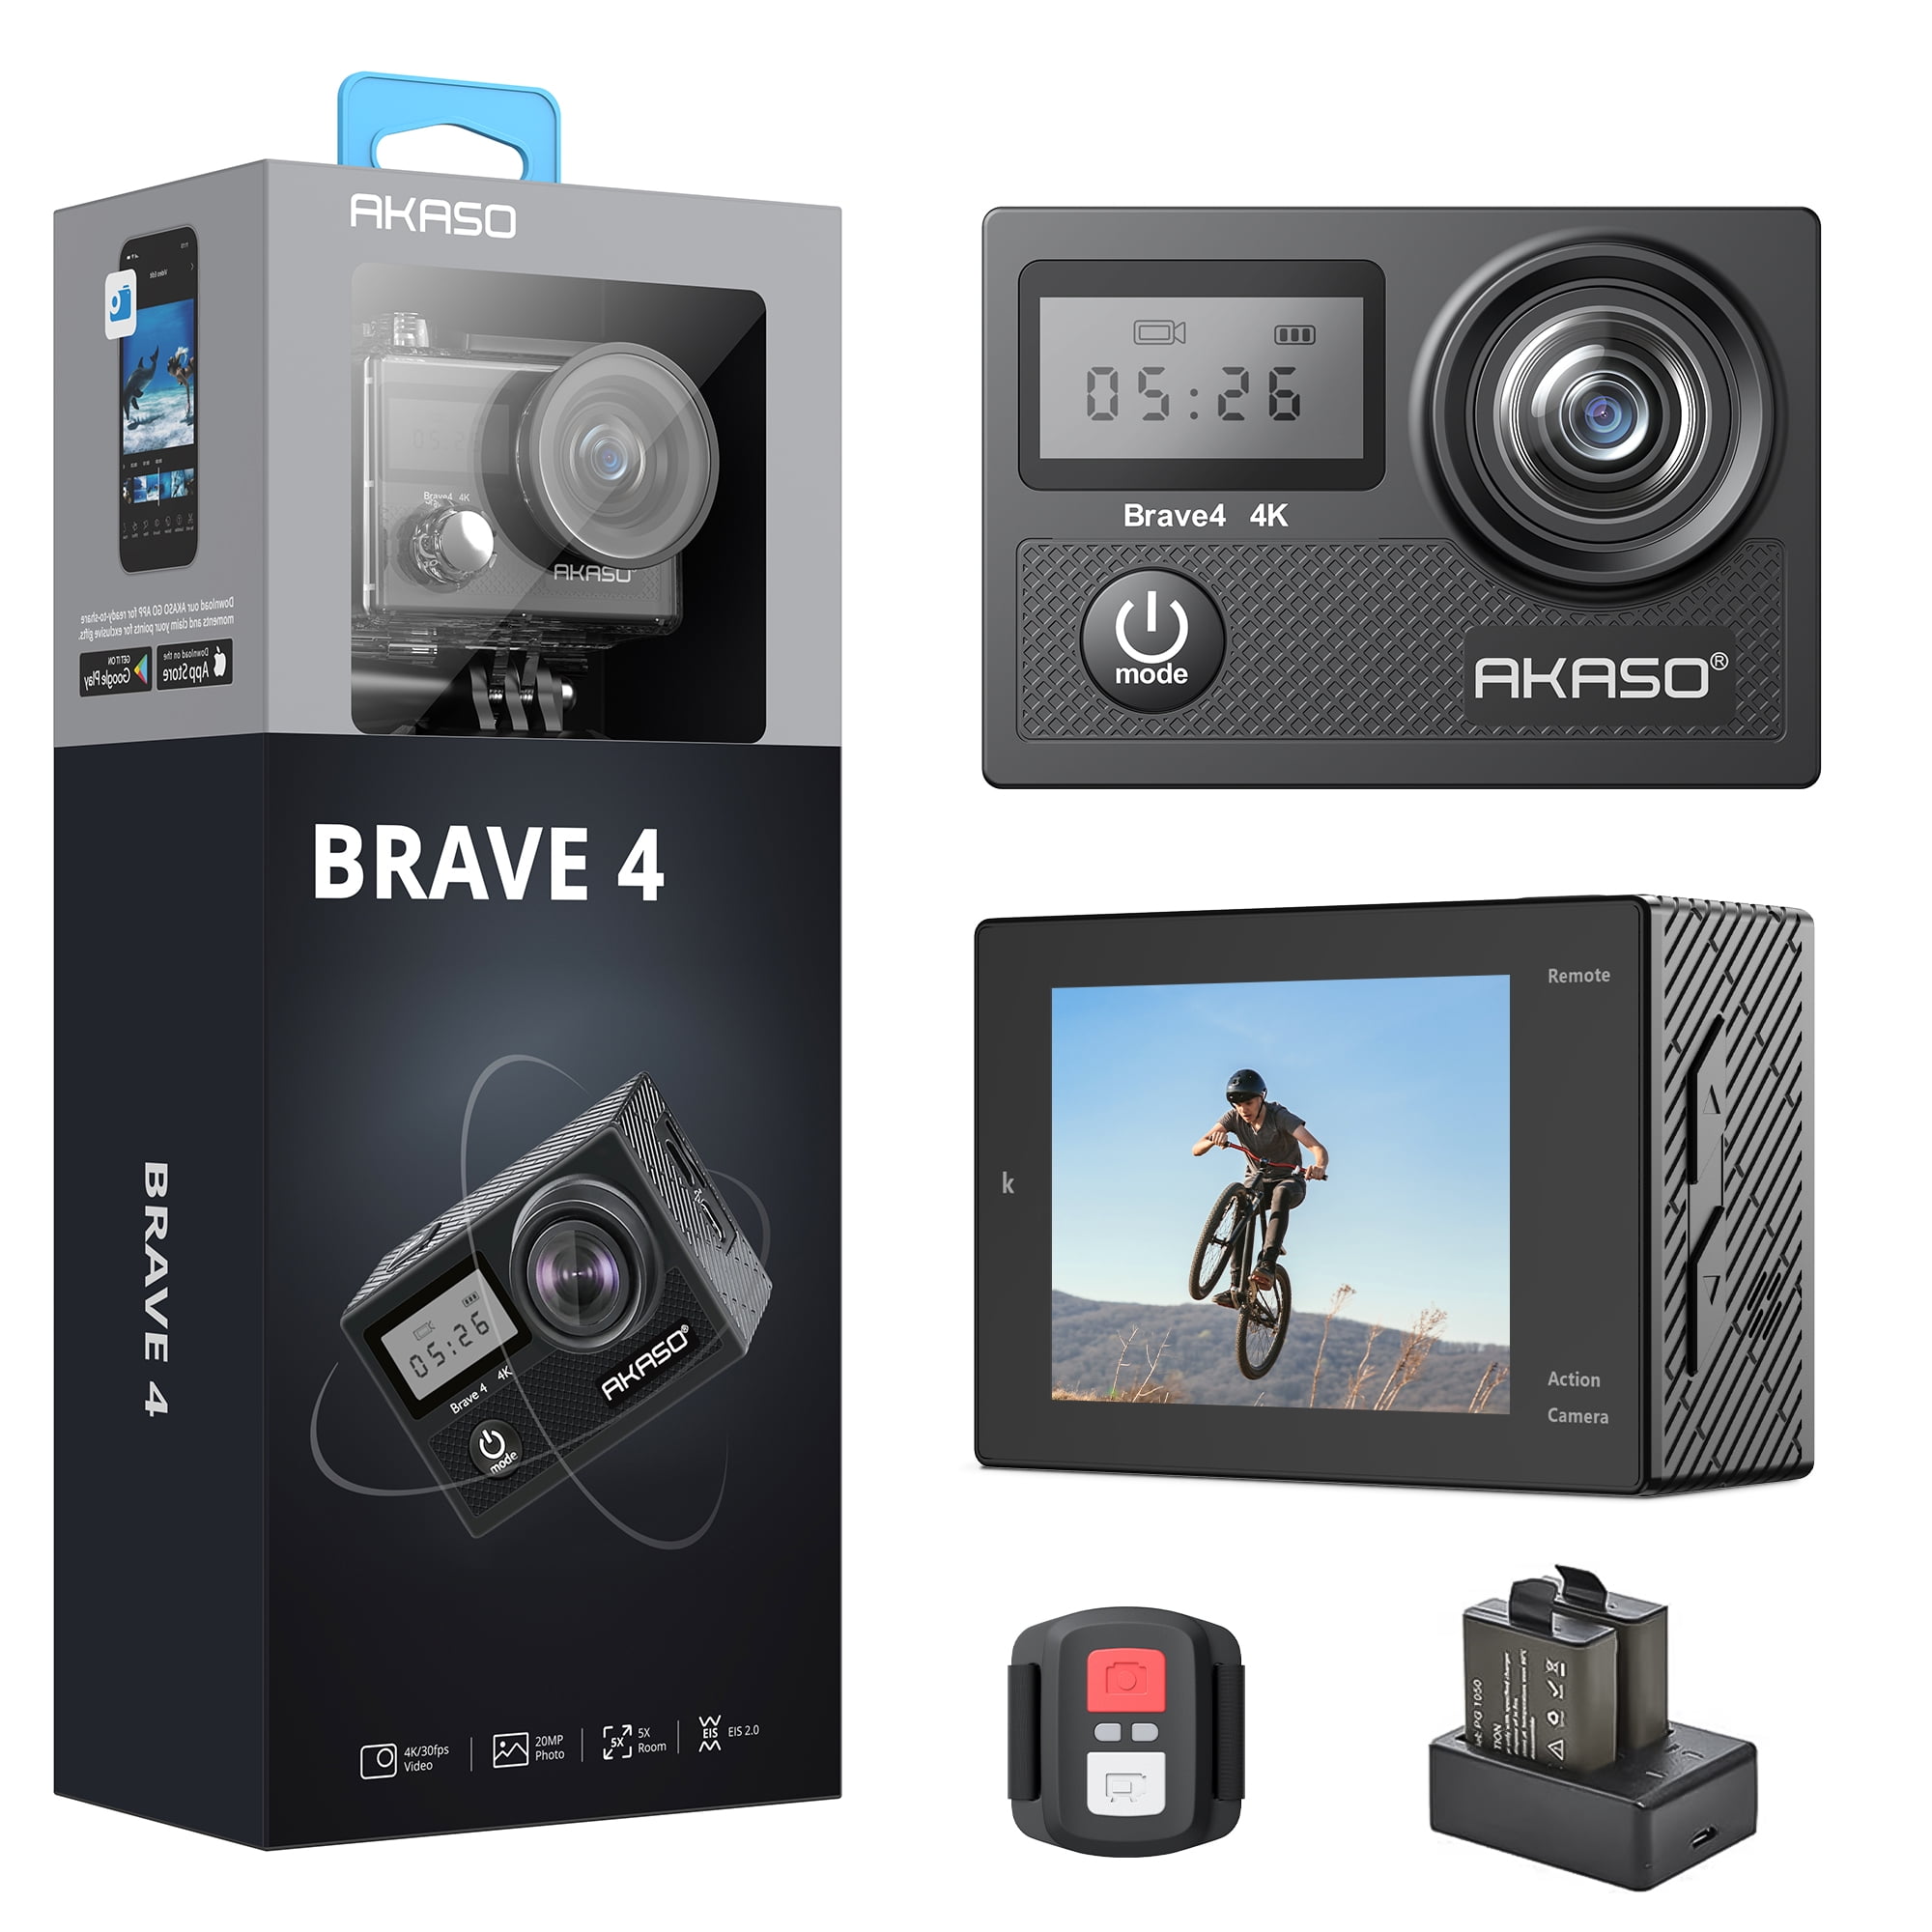 AKASO Brave 8 Action Camera. You're not Supposed to Know About This! 